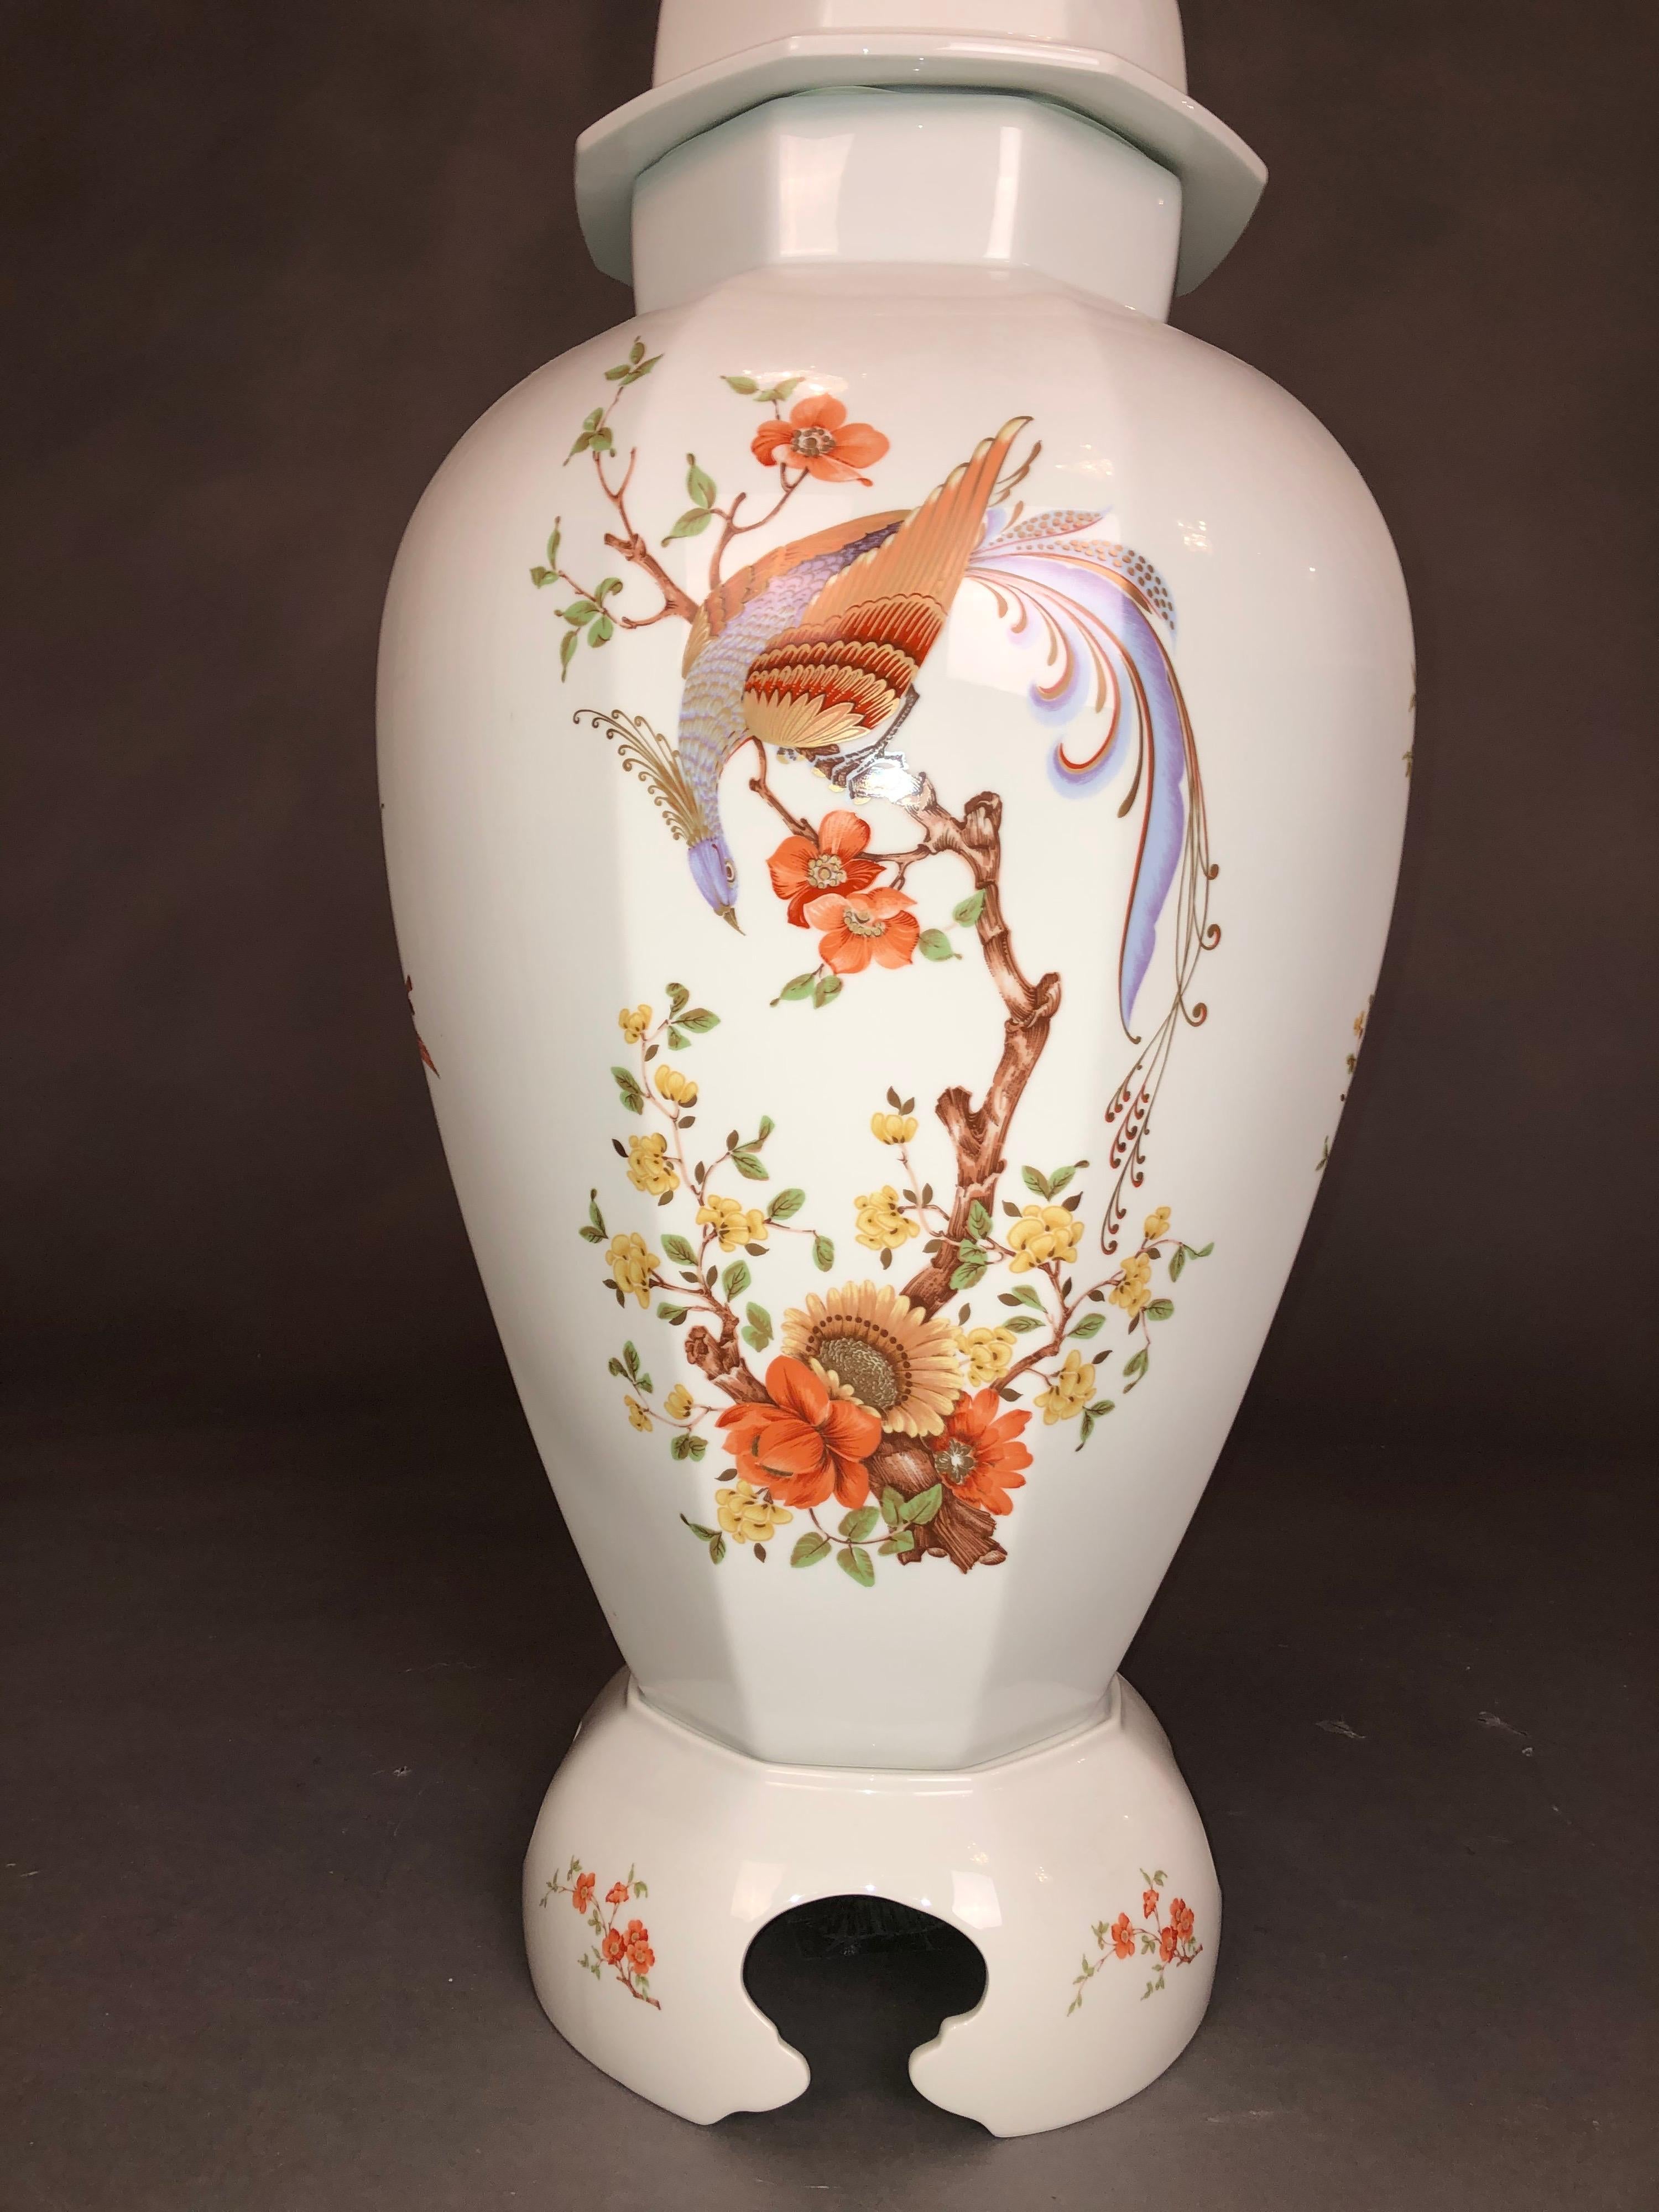 Design Olivia on the front and back of the bird of paradise - peacock decor with bouquets of flowers and scattered flowers, a large Chinese dragon figure as a lid knob.
The vase consists of 3 parts and has a height of 100 cm (1 meter). Height of